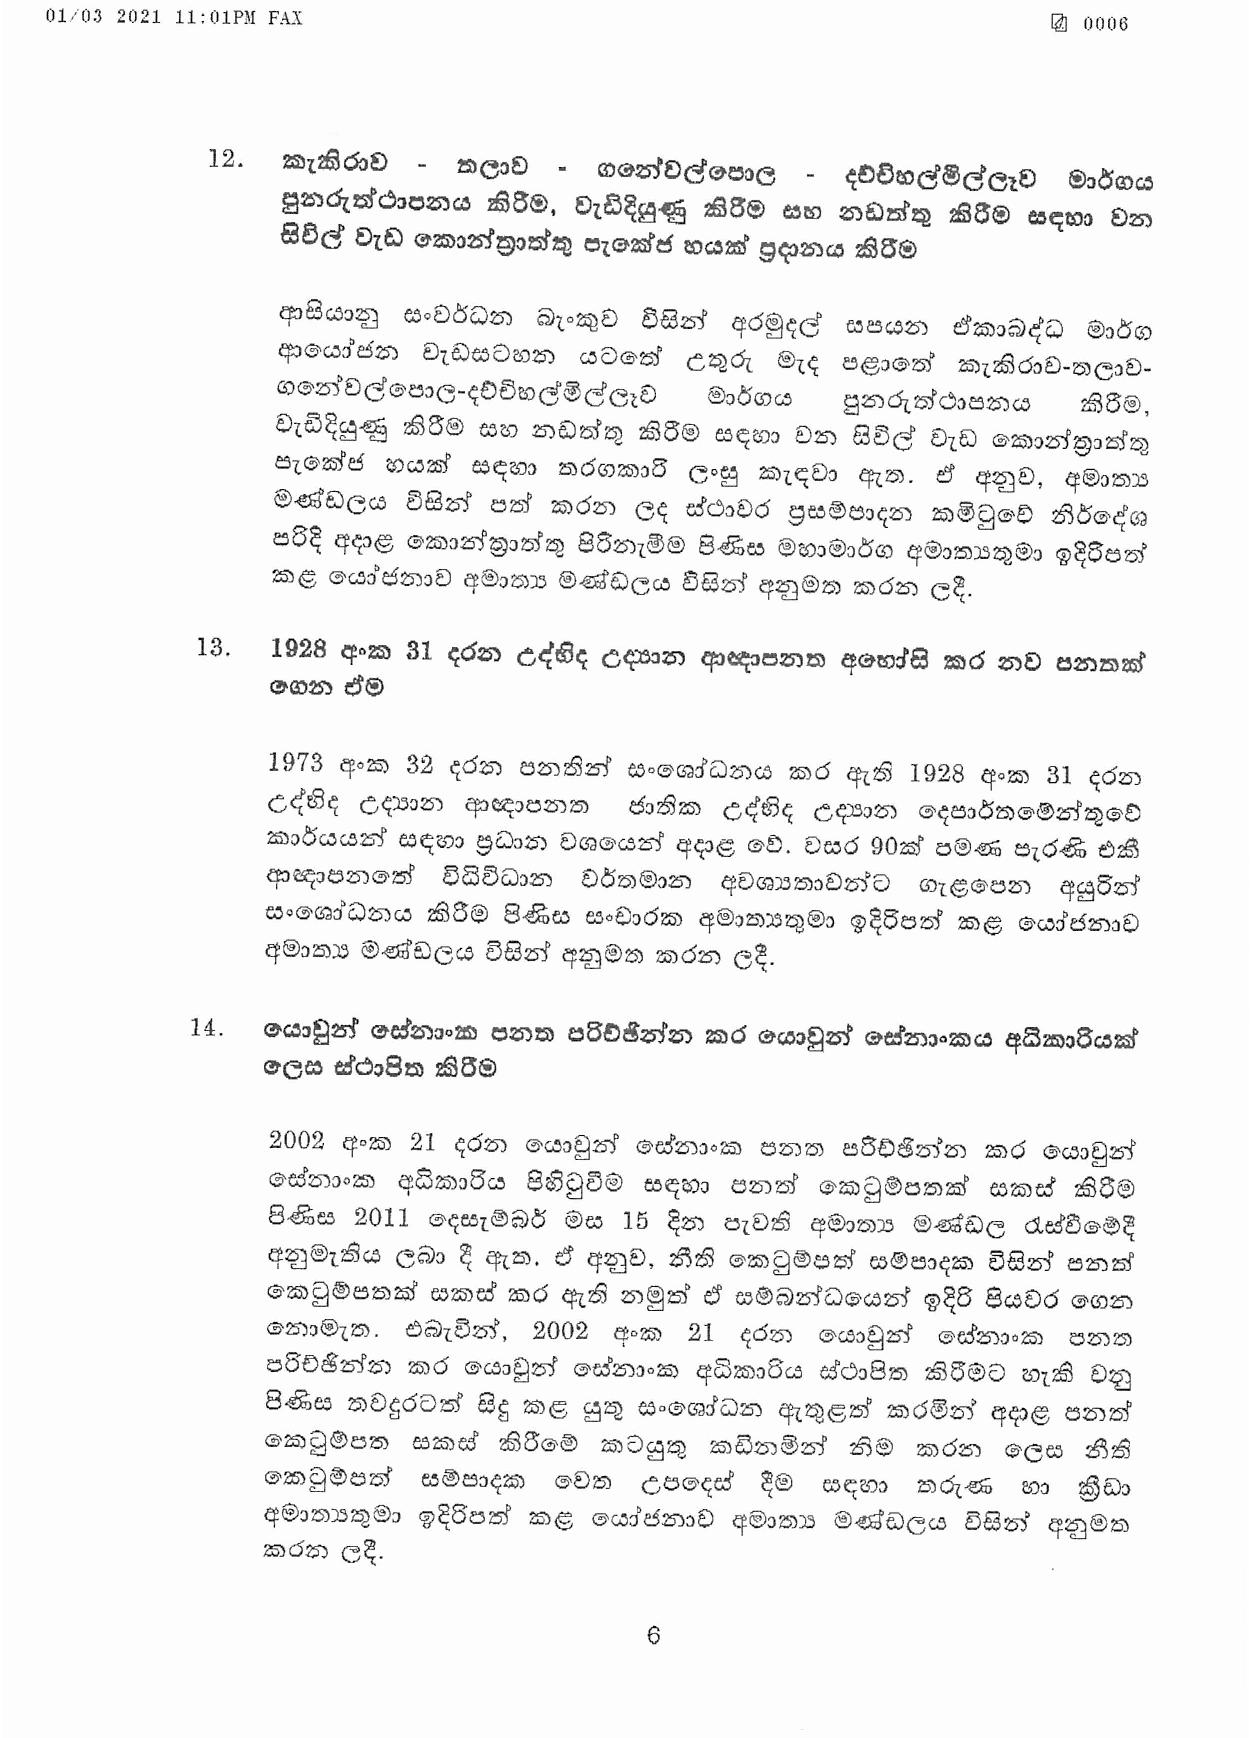 Cabinet Decision on 01.03.2021 page 006